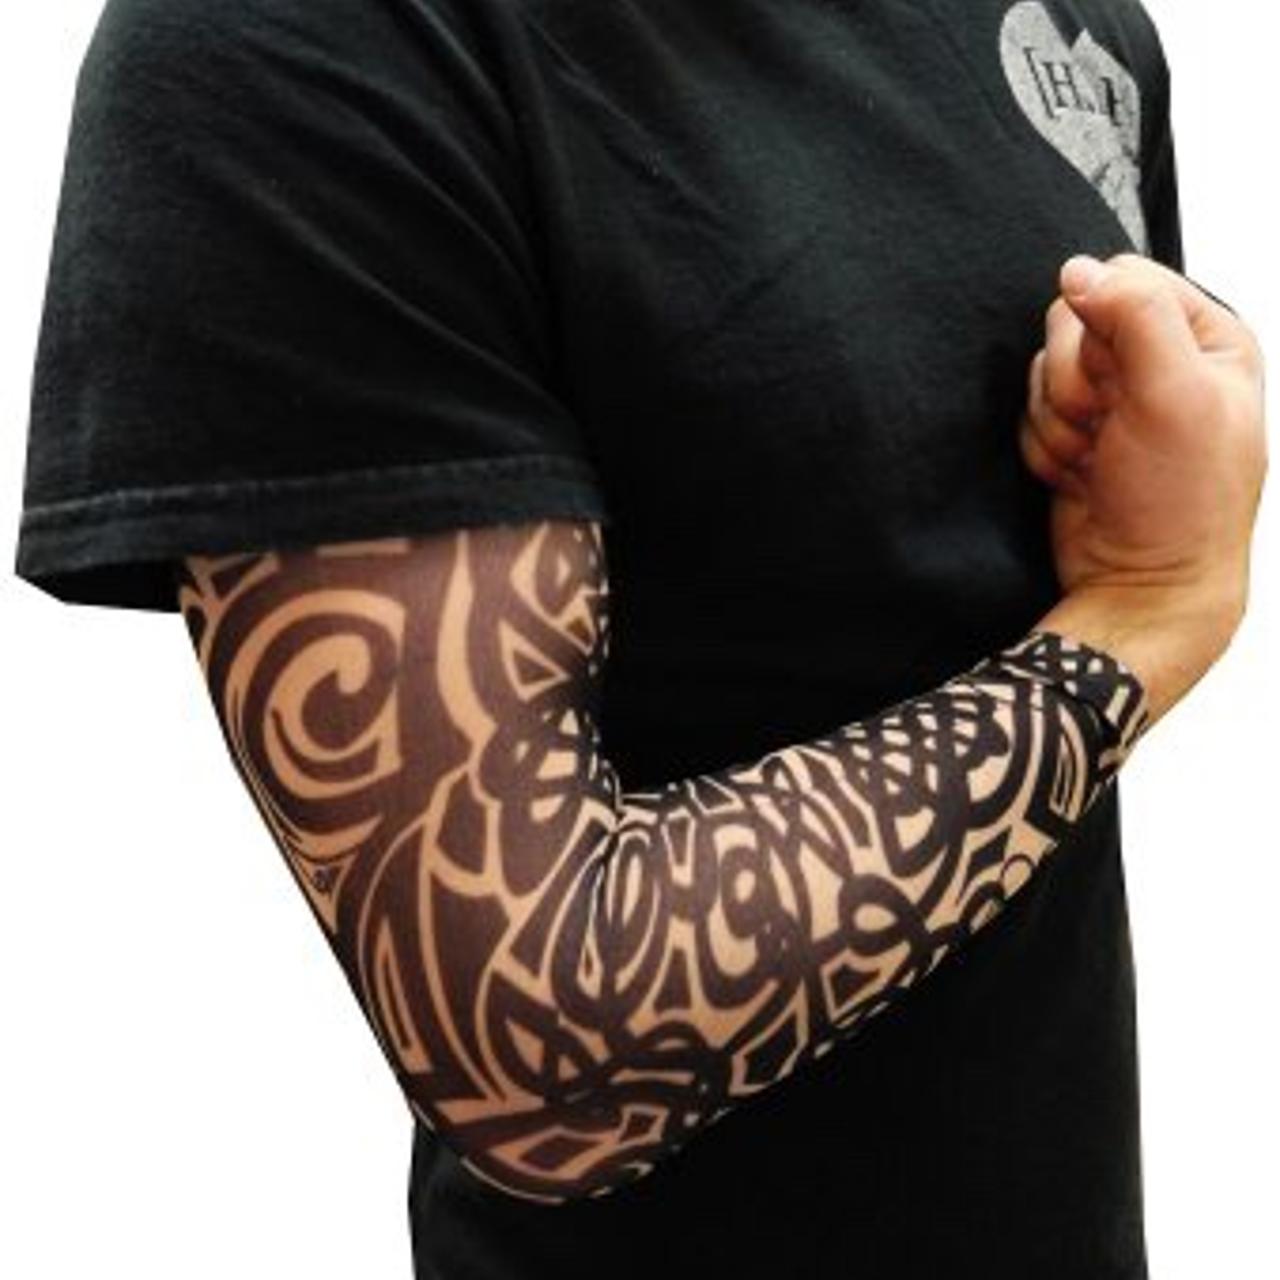 Amazon.com: 12 PCS Temporary Tattoo Sleeves for Men Women Seamless,Arts Arm  Sunscreen Fake Piercings Tattoos Cover Up Sleeves,Designs Tiger, Crown  Heart, Skull, Tribal,Etc Unisex Stretchable Cosplay Accessories : Beauty &  Personal Care